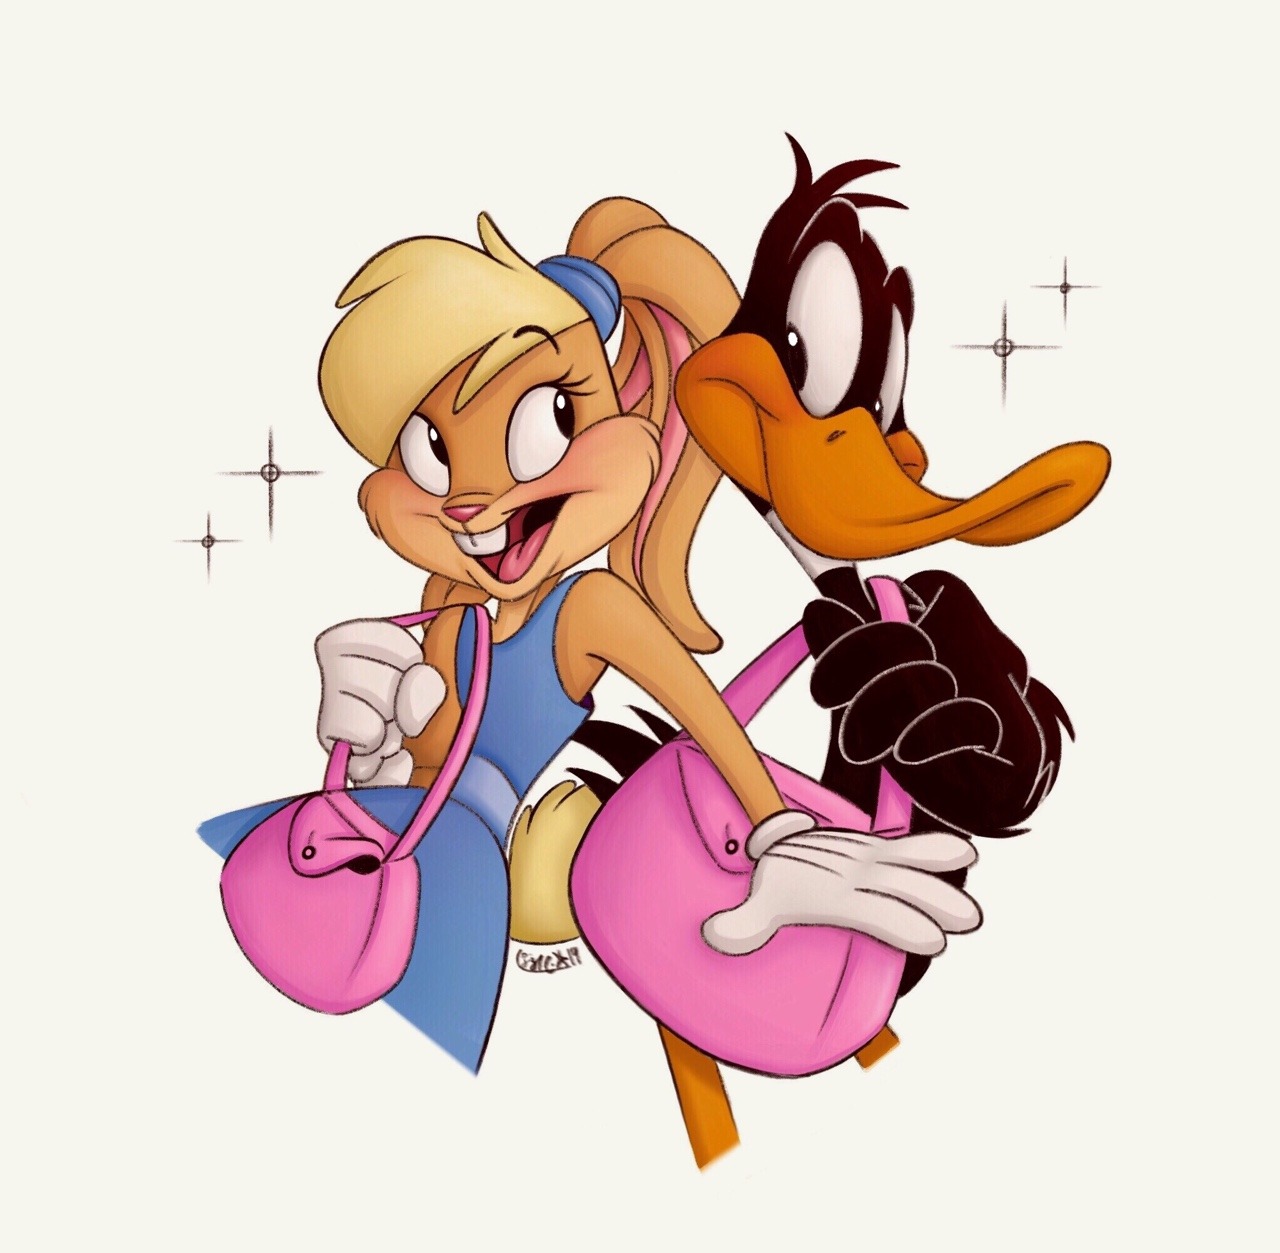 In the original space jam, lola bunny was introduced as a love interest for...